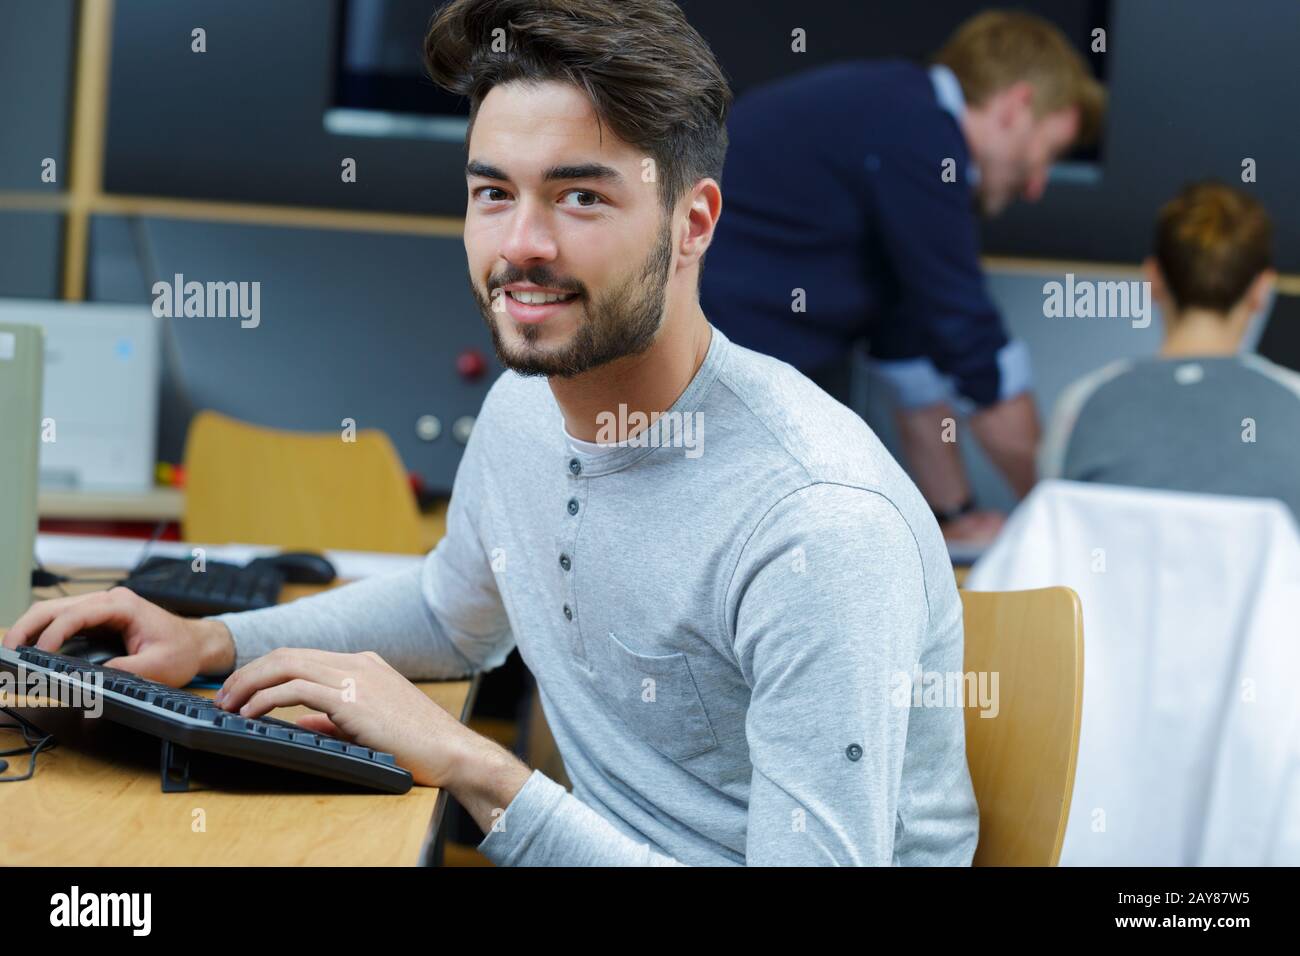 portrait of young male student using computer Stock Photo